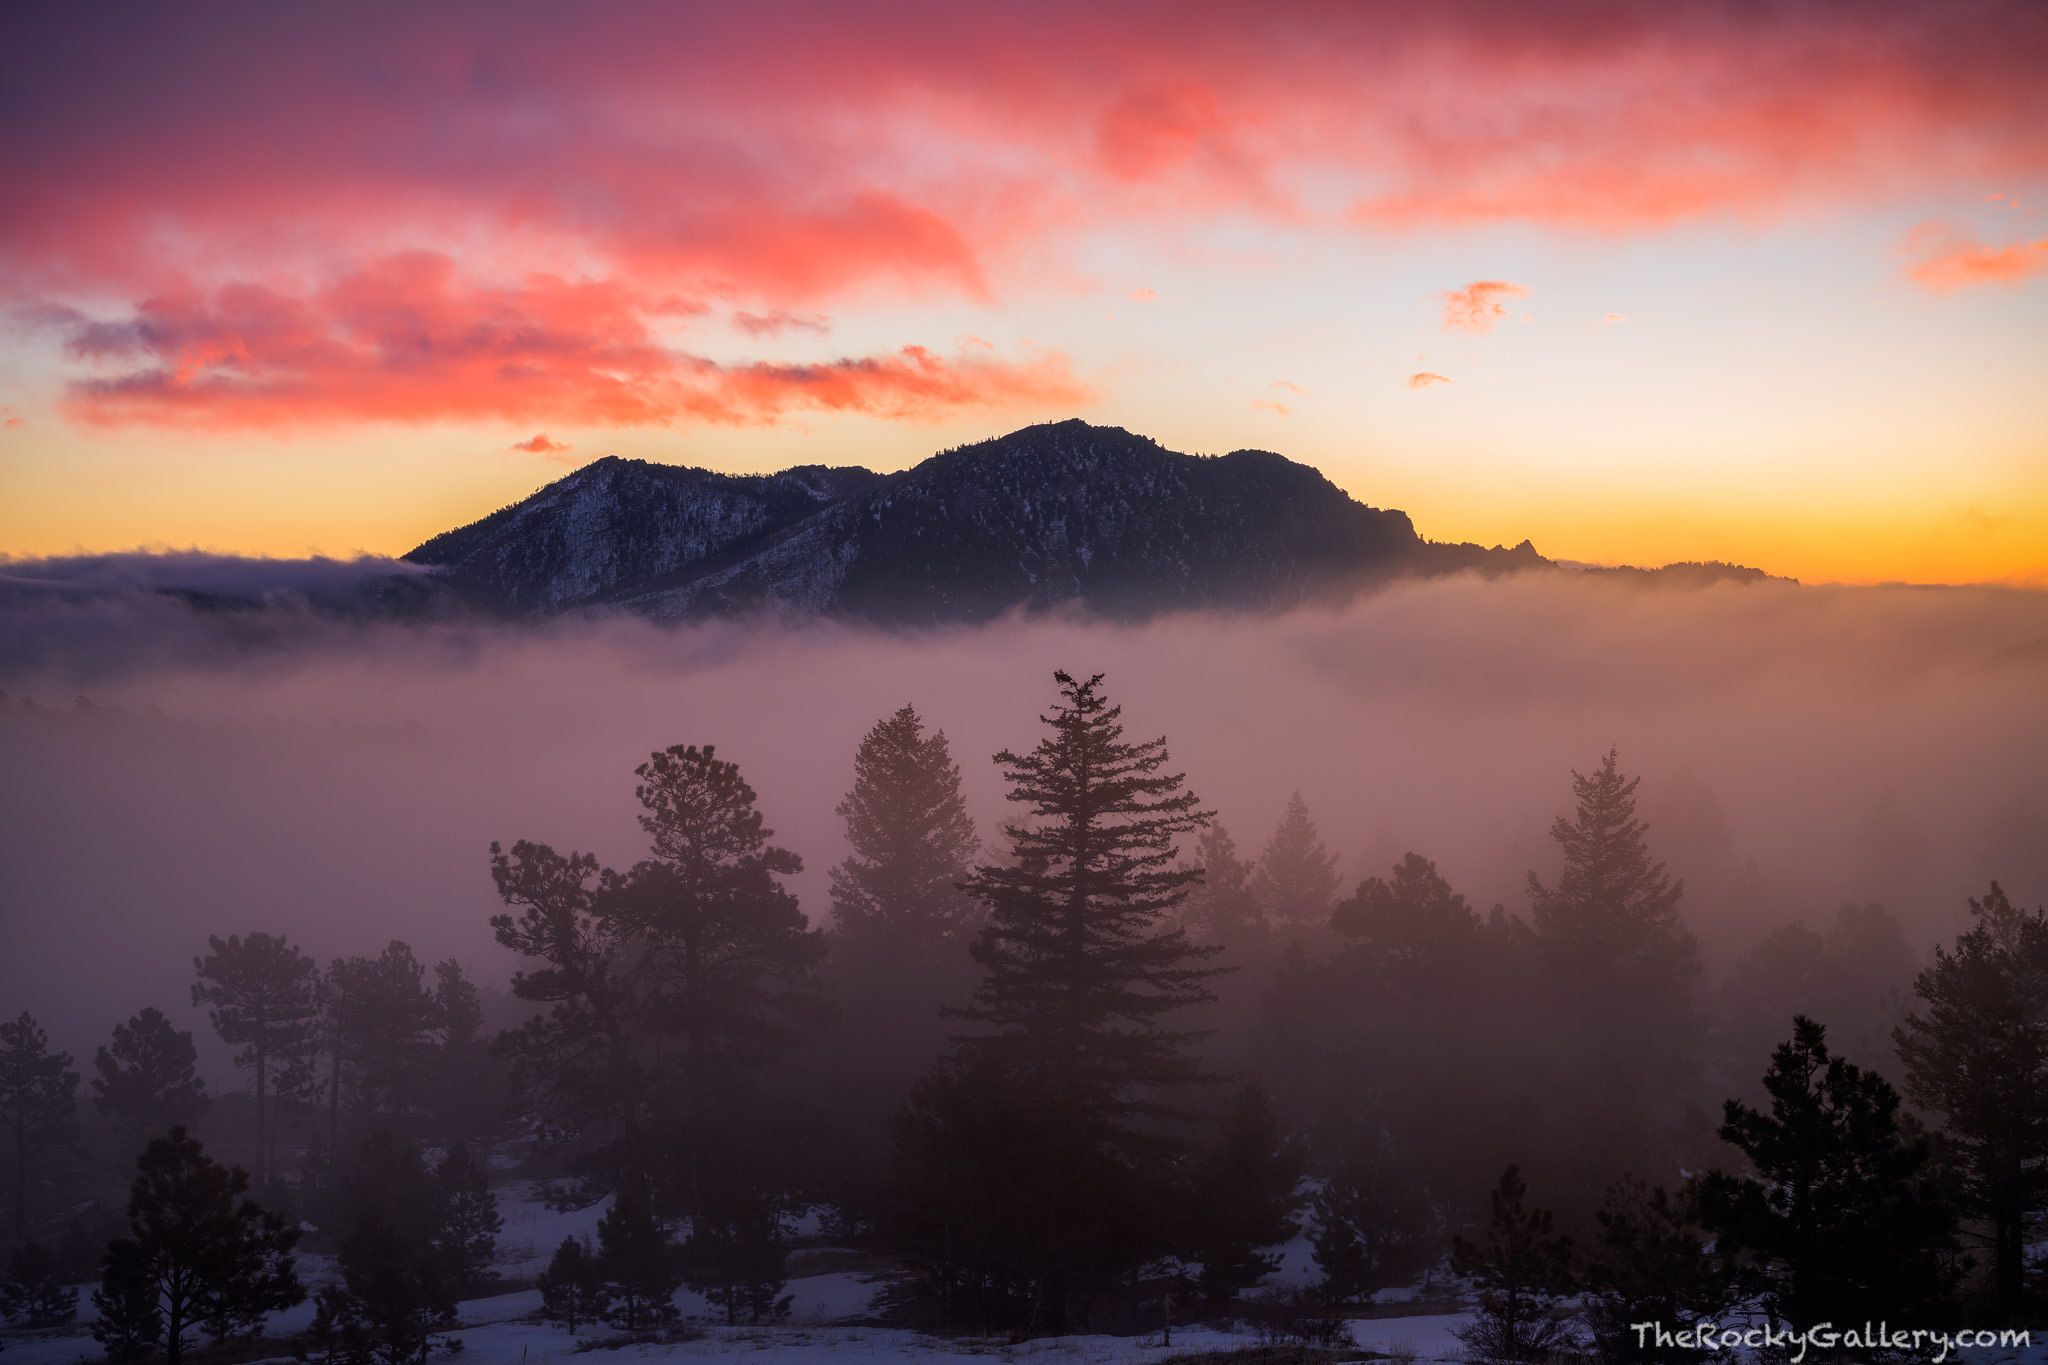 With fog covering the lower elevations at sunrise, South Boulder Peak rises above the landscape at sunrise as seen from Walker...